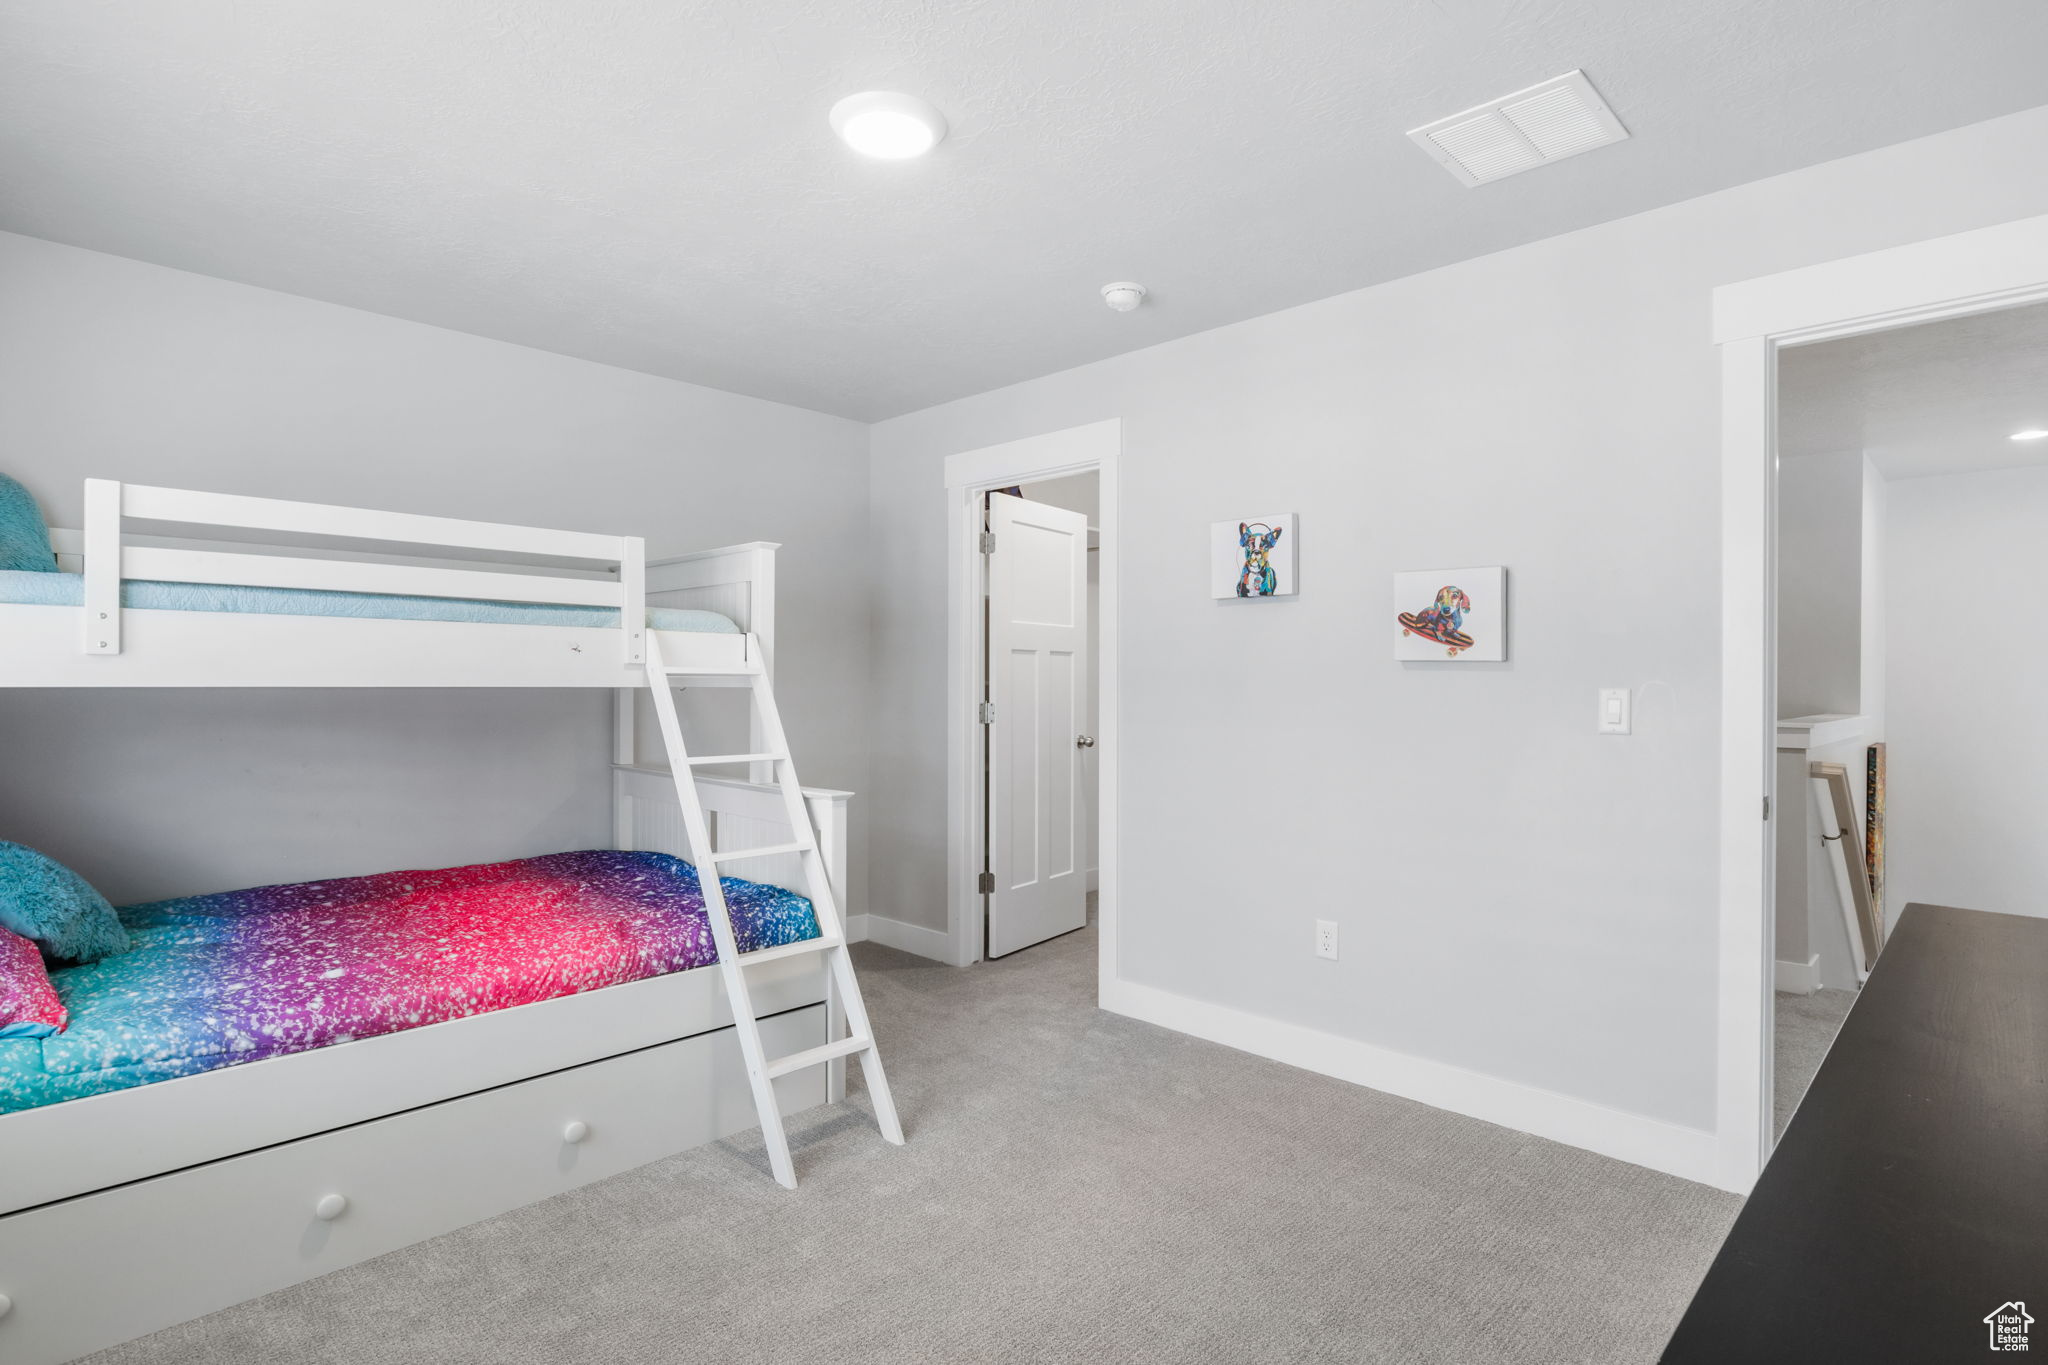 Large secondary bedroom with walk-in closet